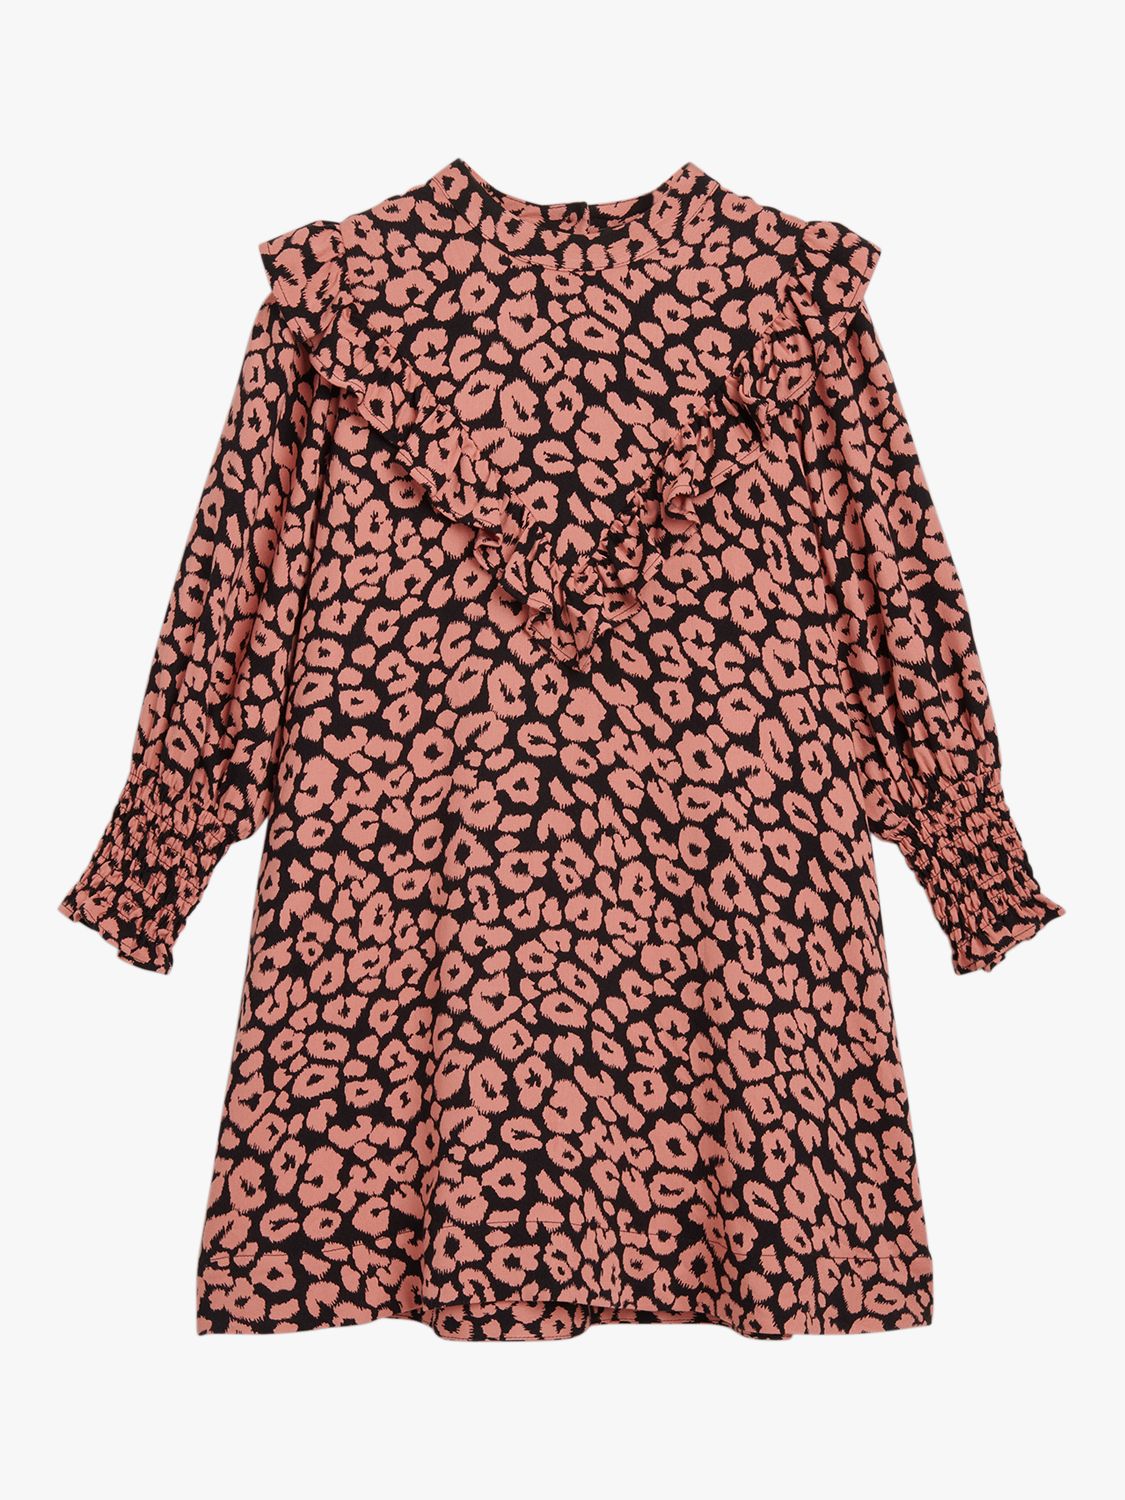 Buy Whistles Kids' Avery Fuzzy Leopard Dress, Pink/Multi Online at johnlewis.com